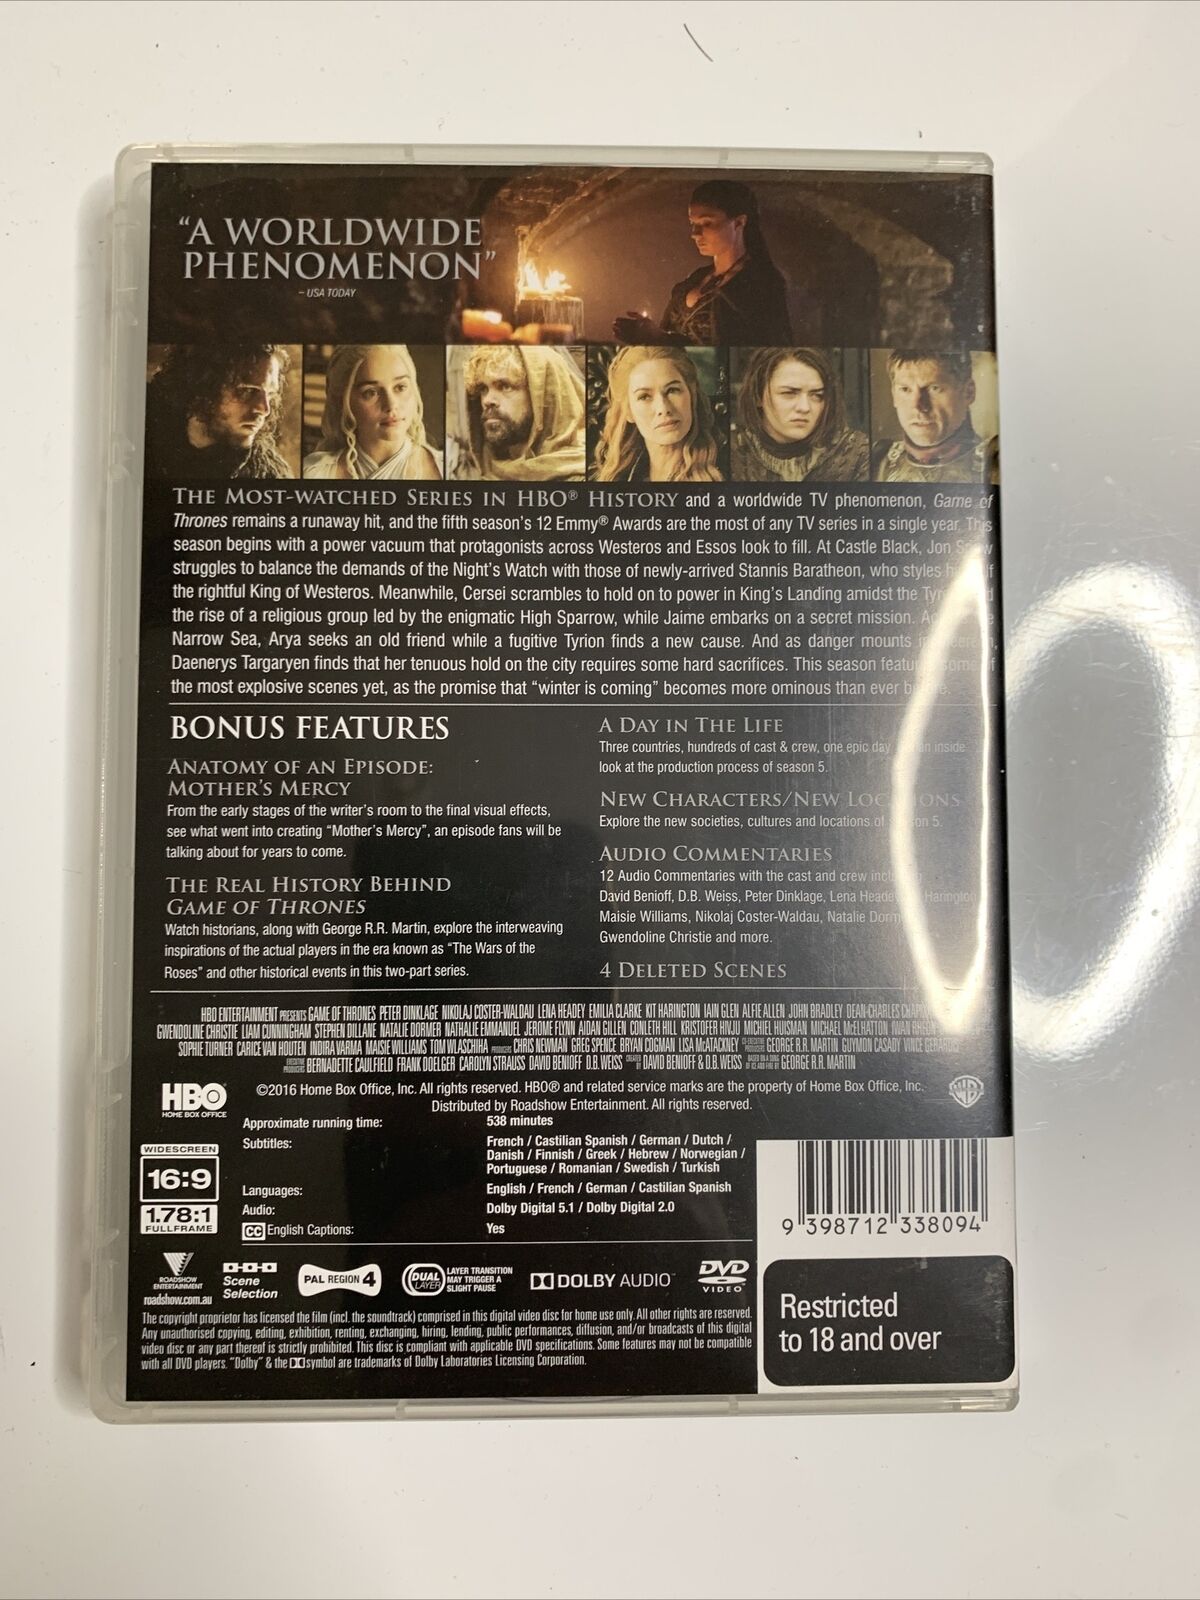 Game Of Thrones - The Complete Season 5 Limited Edition (DVD, 2016) Region 4